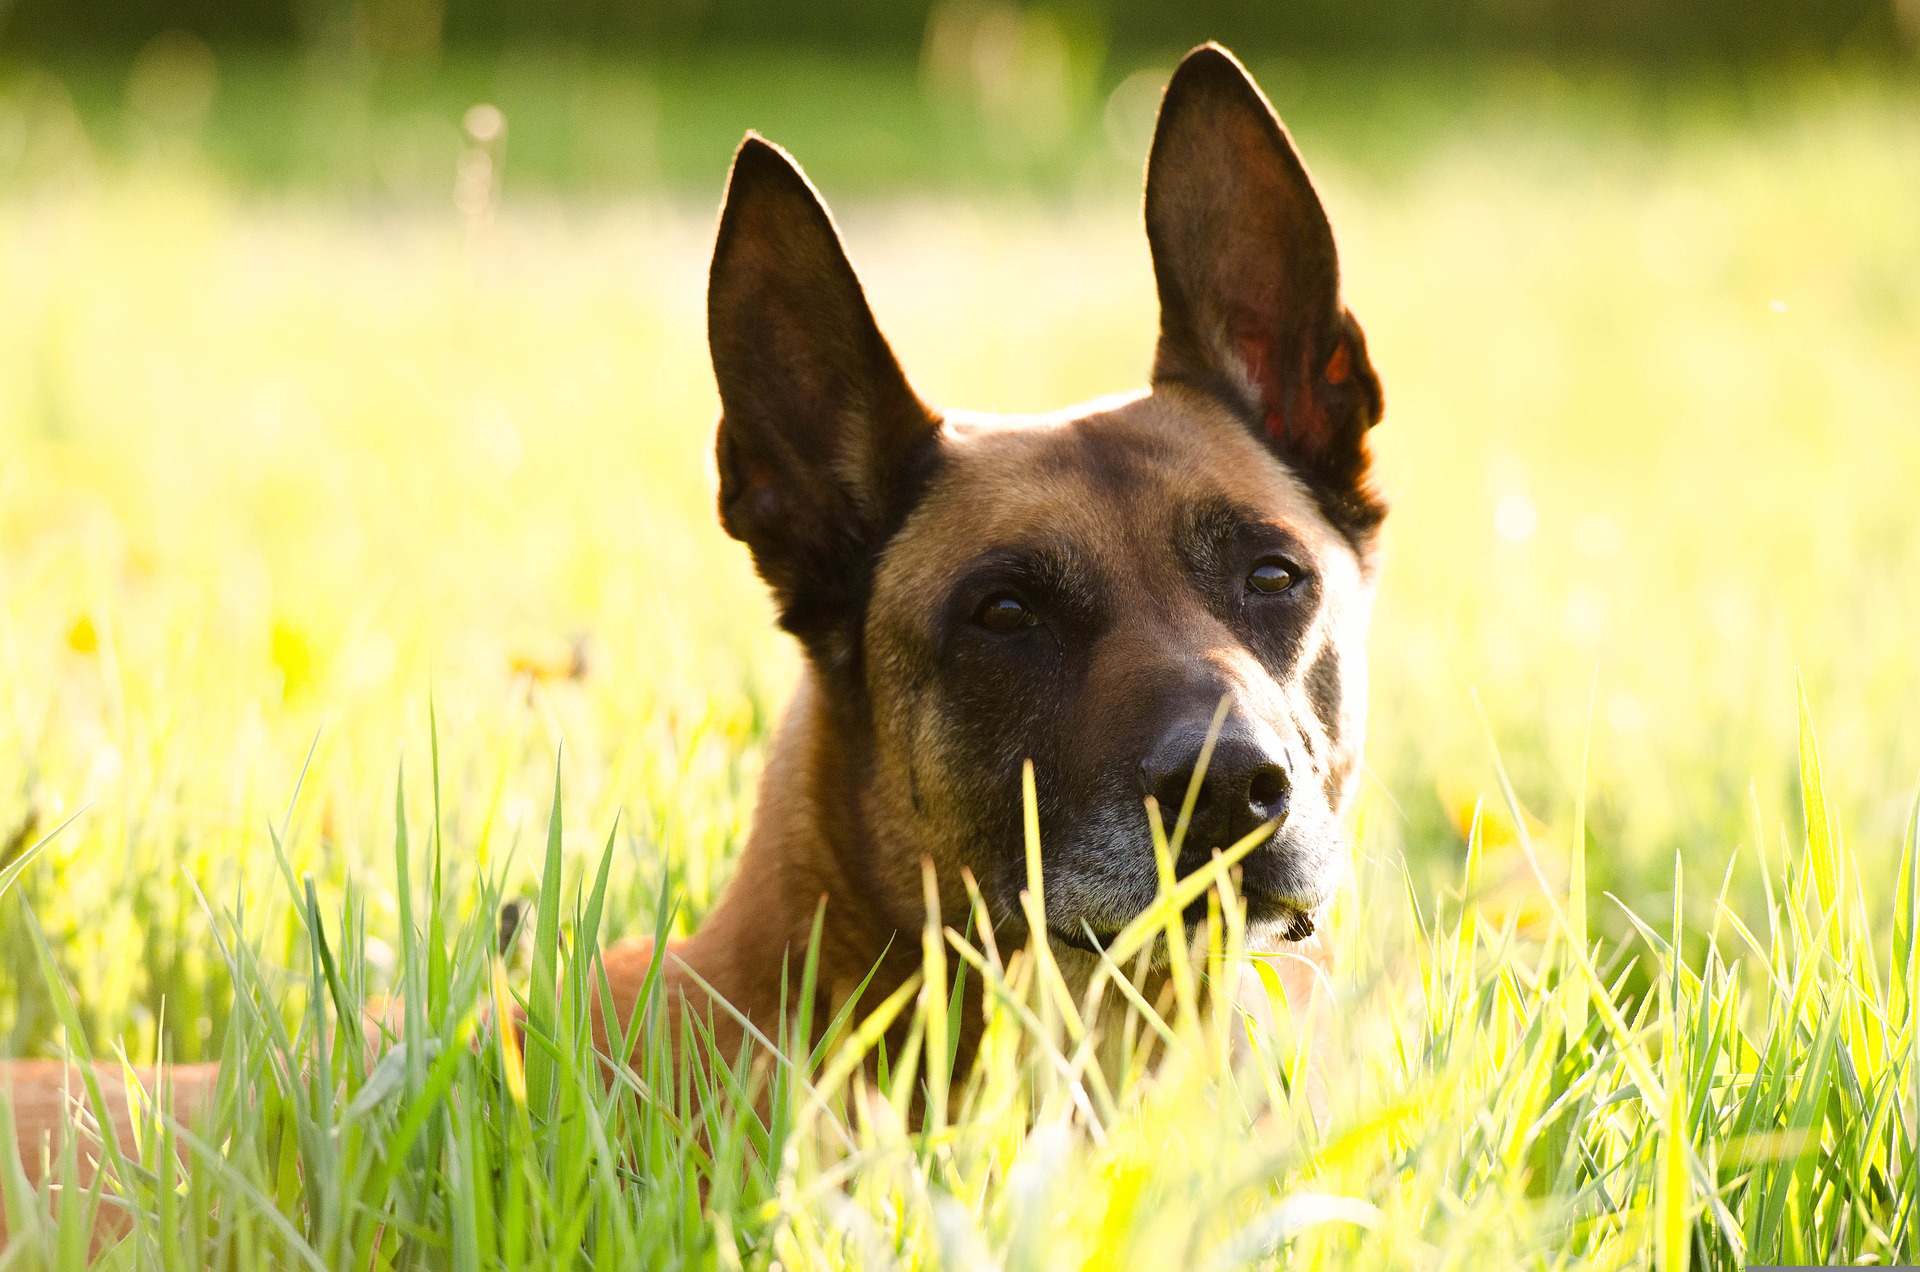 a beautiful dog relaxing in the grass while someone wonders how long do belgian malinois live